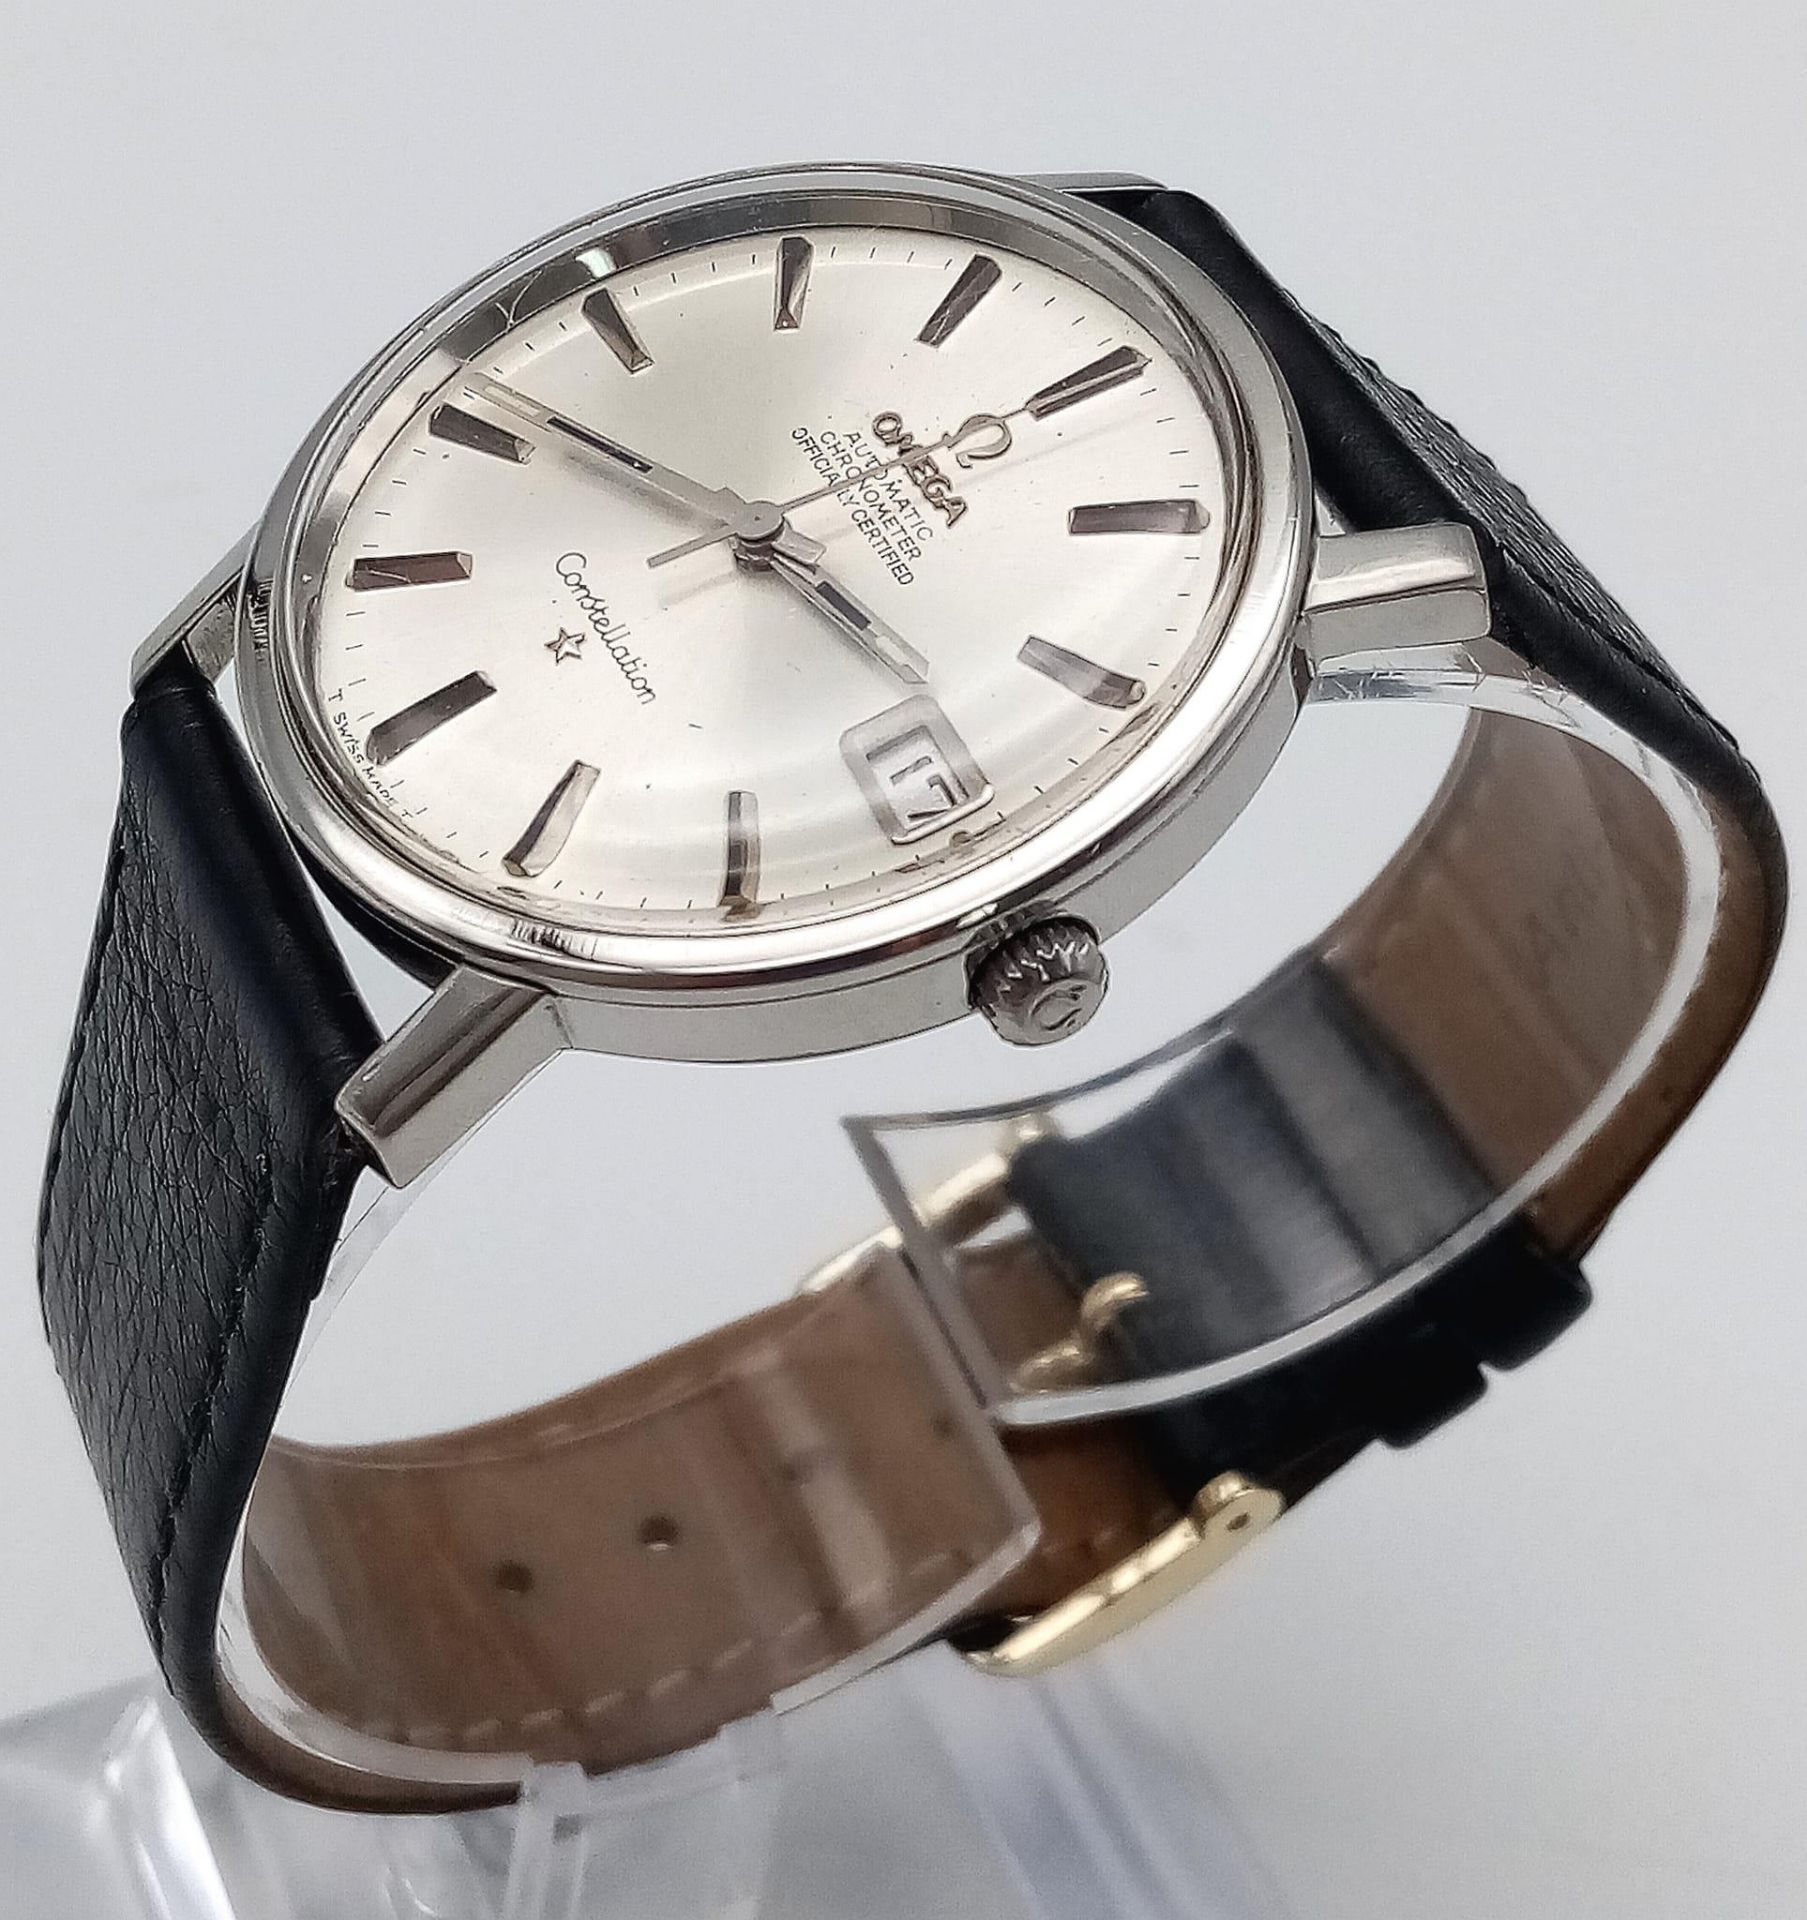 Omega Constellation Chronometer Men's Watch. Automatic movement, leather strap, 32mm dial. Circa - Image 5 of 13